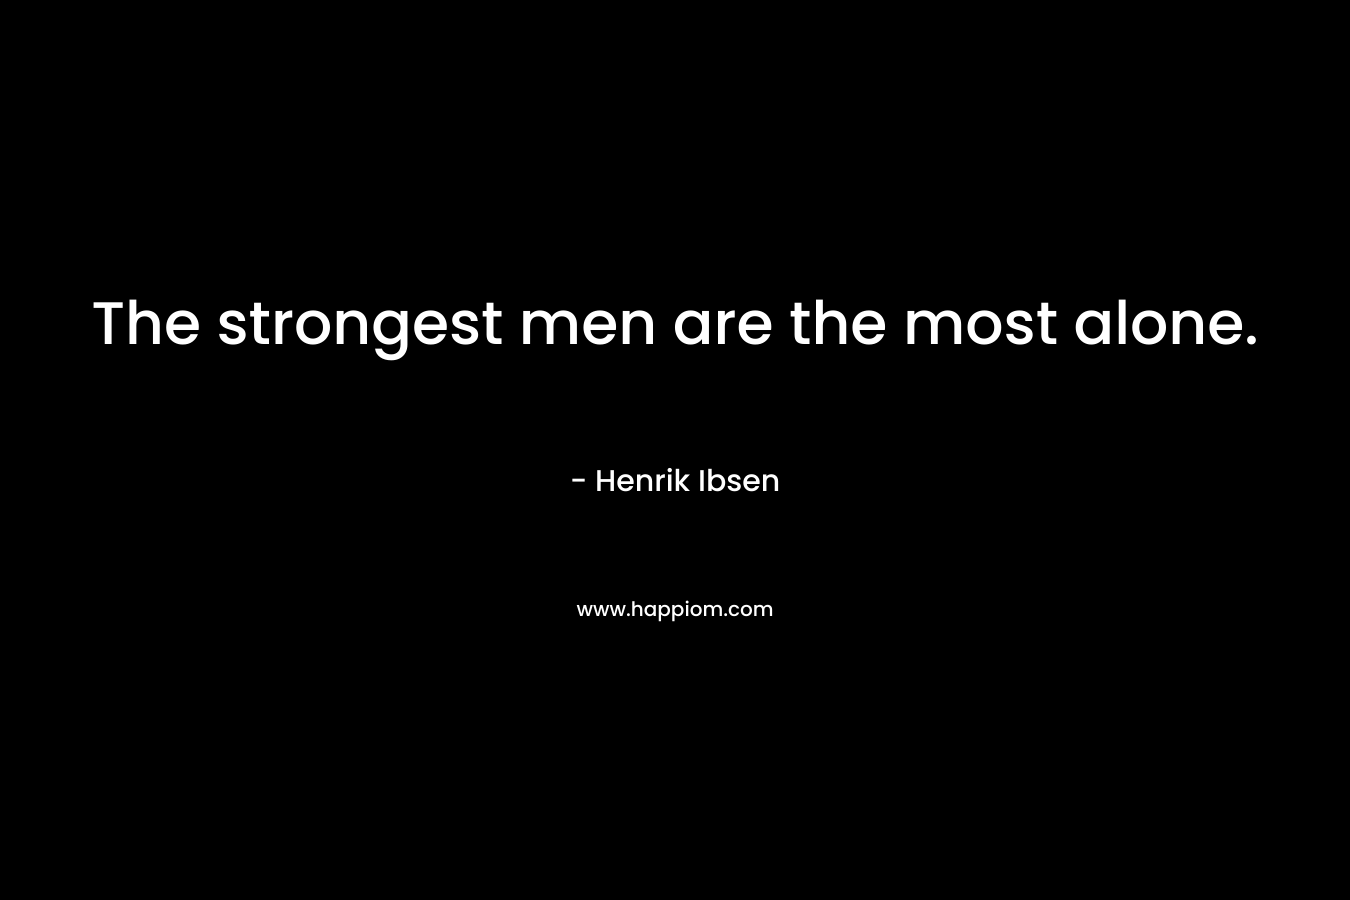 The strongest men are the most alone. – Henrik Ibsen